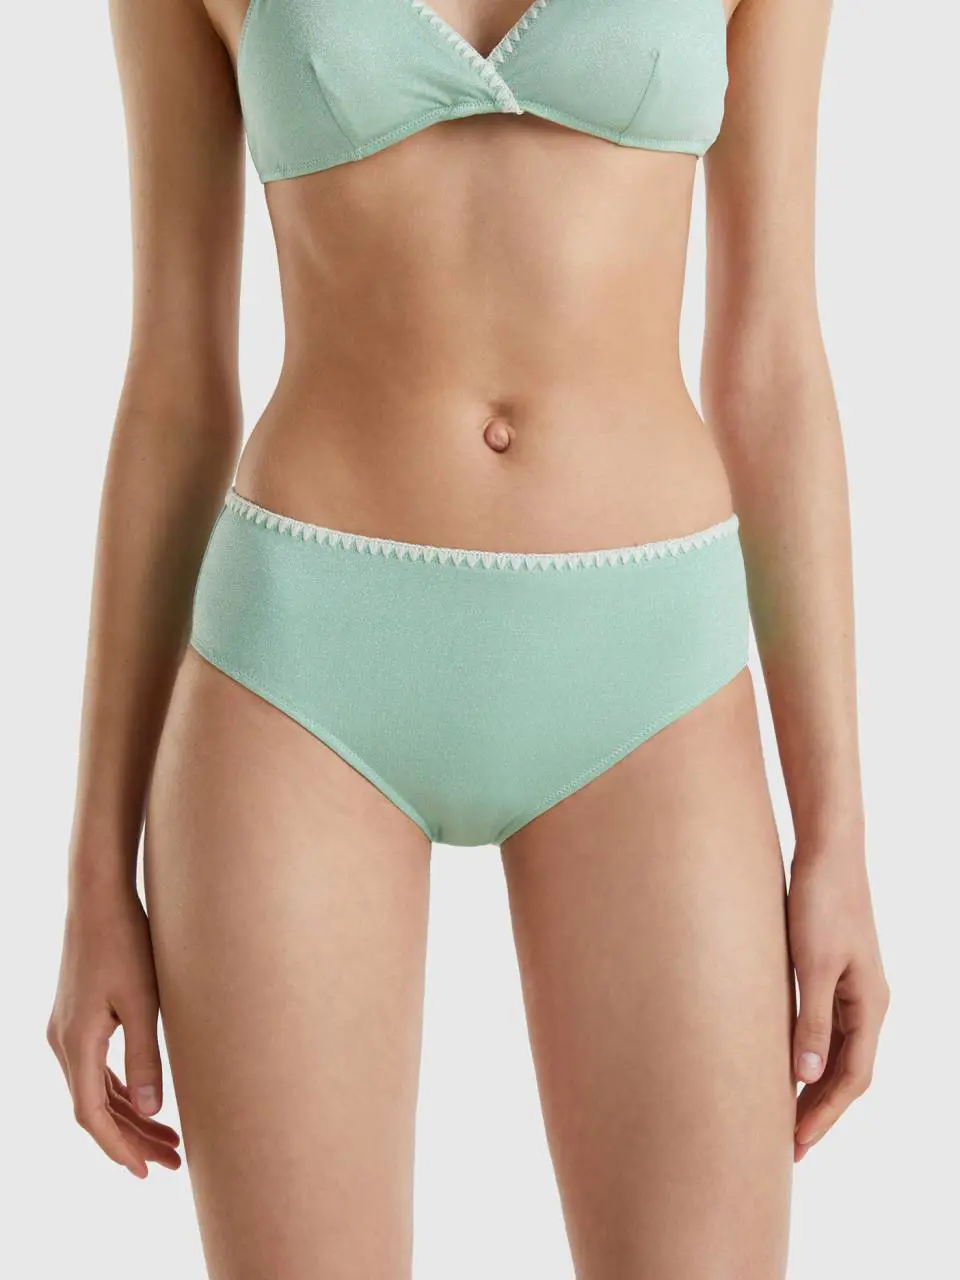 Benetton high-waisted bikini bottoms with lurex and embroidery. 1